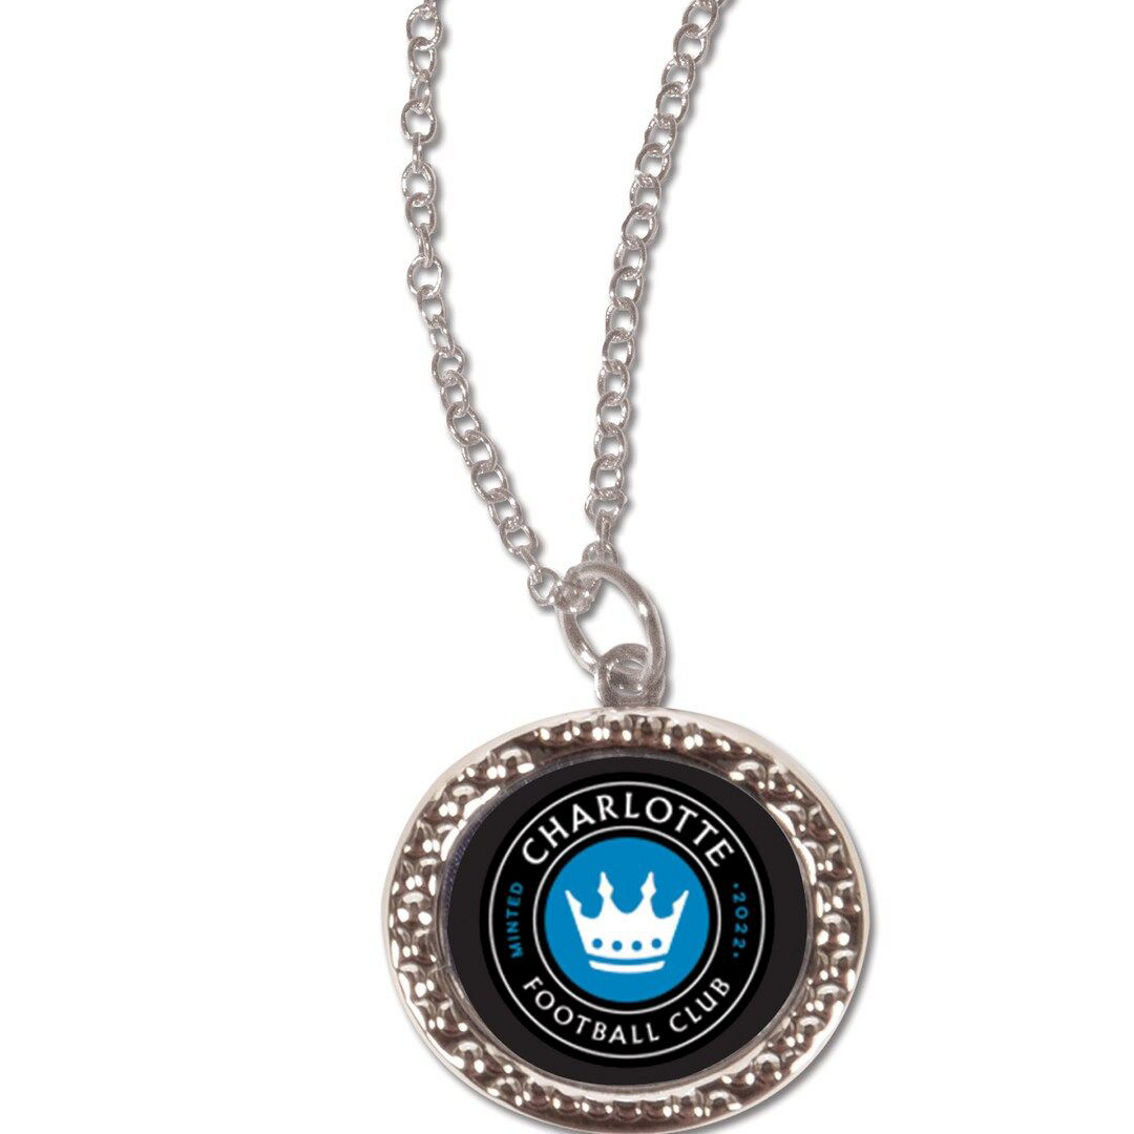 WinCraft Charlotte FC Charm Necklace - Image 2 of 2